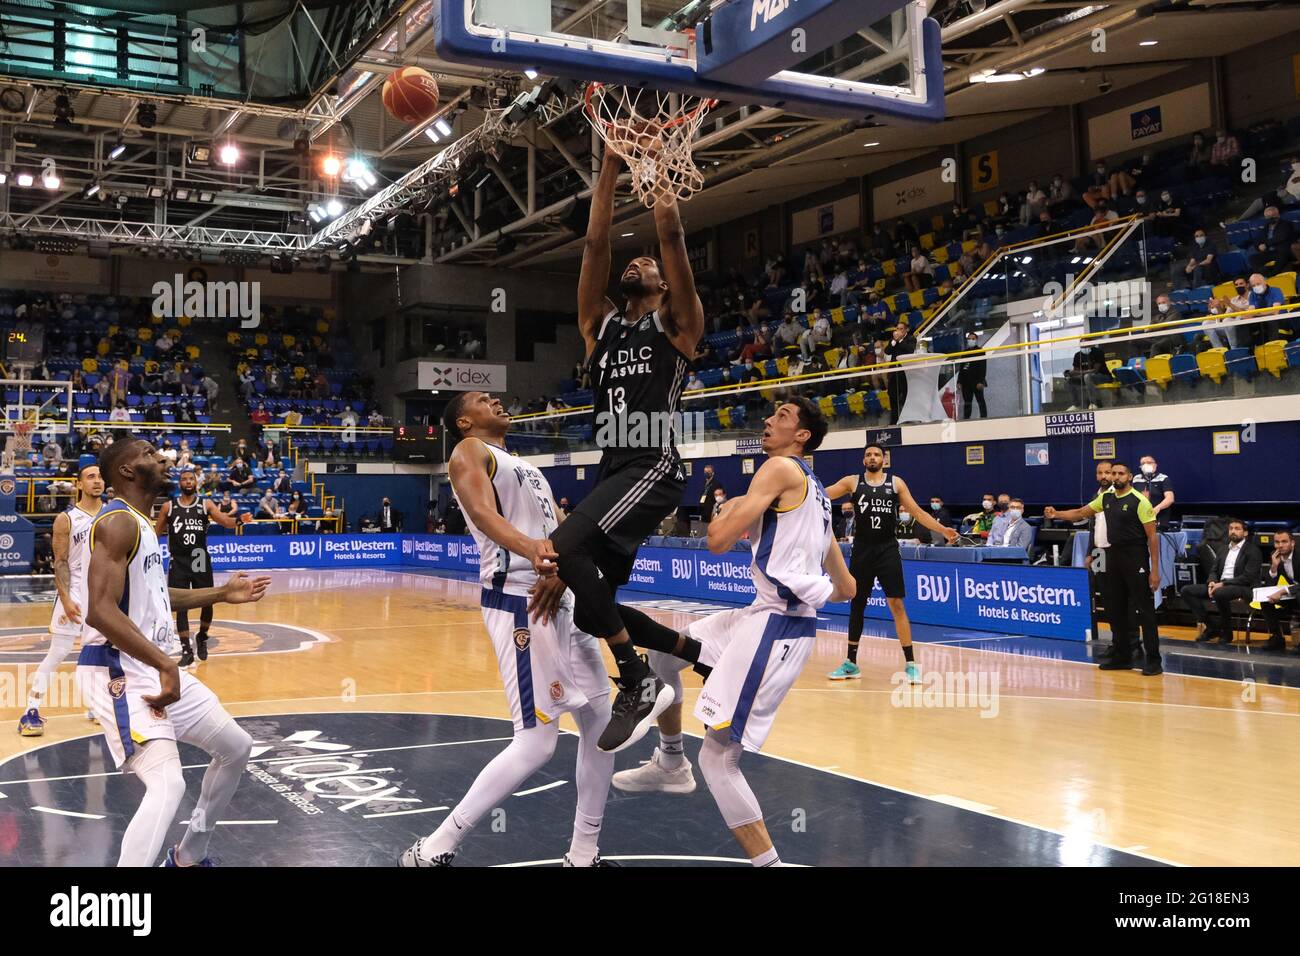 Levallois, Hauts de Seine, France. 5th June, 2021. KEVARRIUS HAYES center  of LDLC-ASVEL in action during the French Basketball championship Jeep Elite  between Boulogne-Levallois and LDLC ASVEL at Palais des Sports Marcel